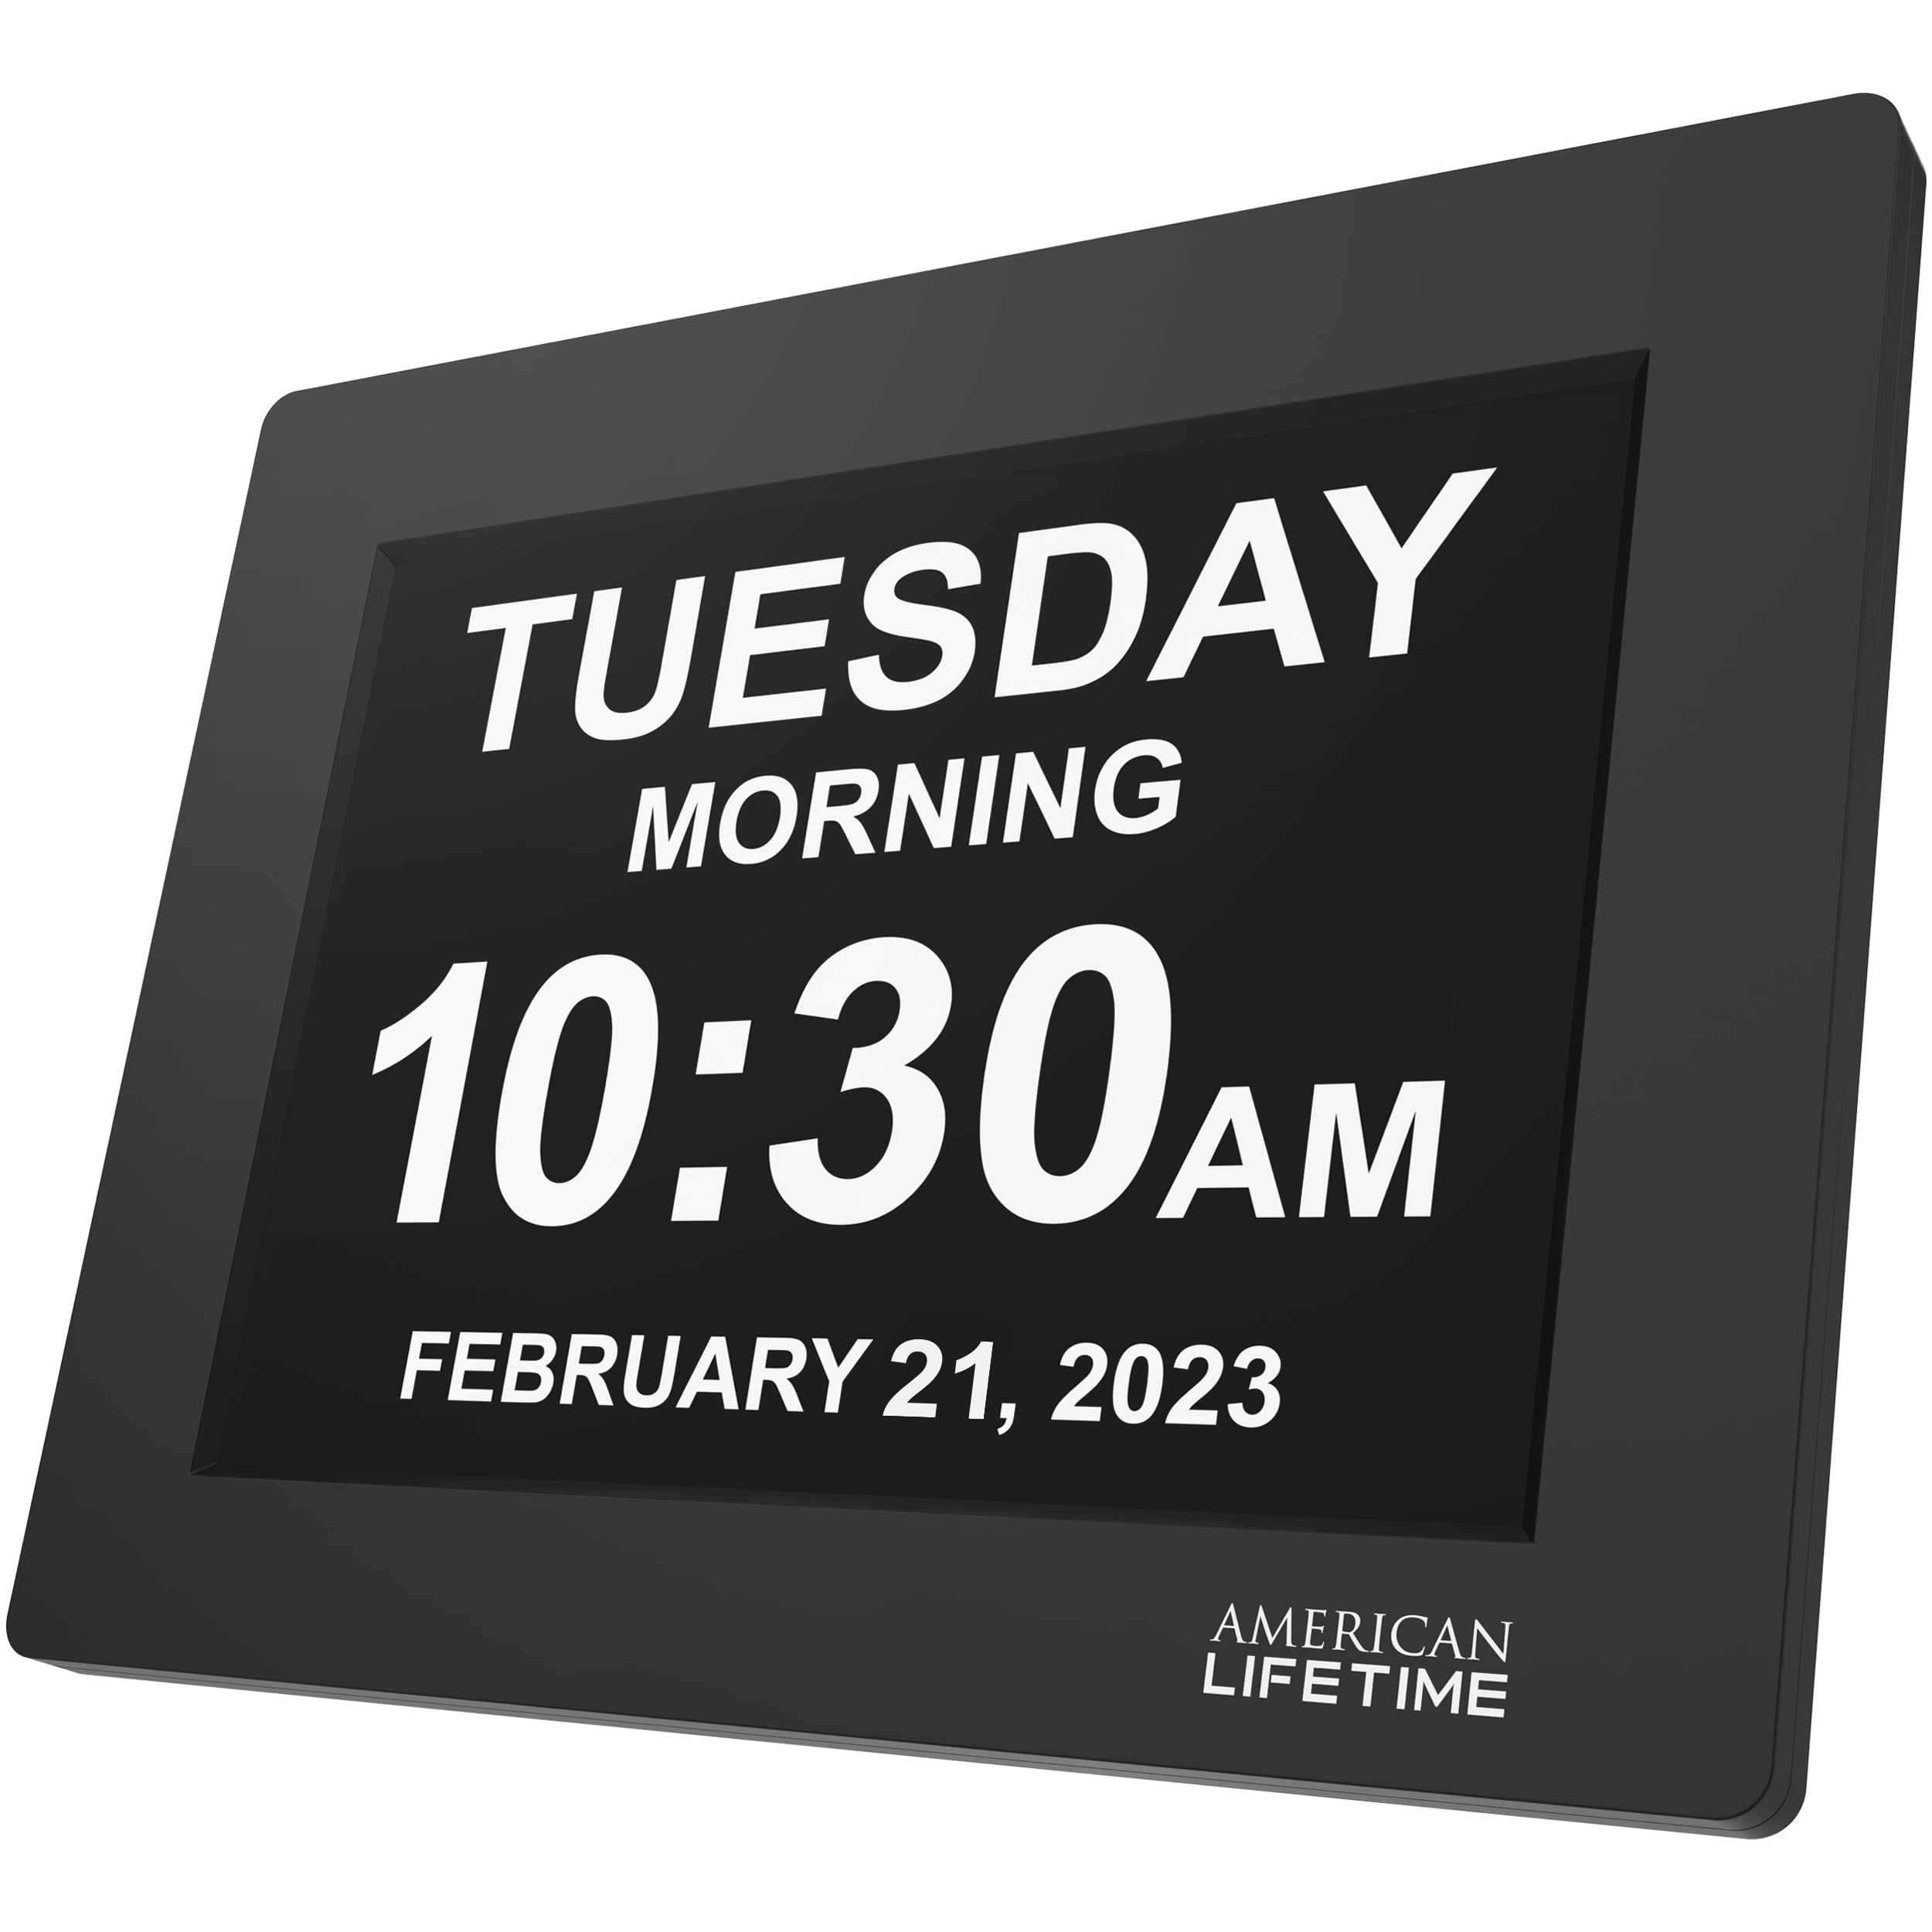 American Lifetime 【New 2022】 Day Clock Large Digital Clock Large Display with Date and Day of The Week, Digital Wall Clock Large Display Dementia Products for Elderly Seniors,Clocks for Seniors  - Like New